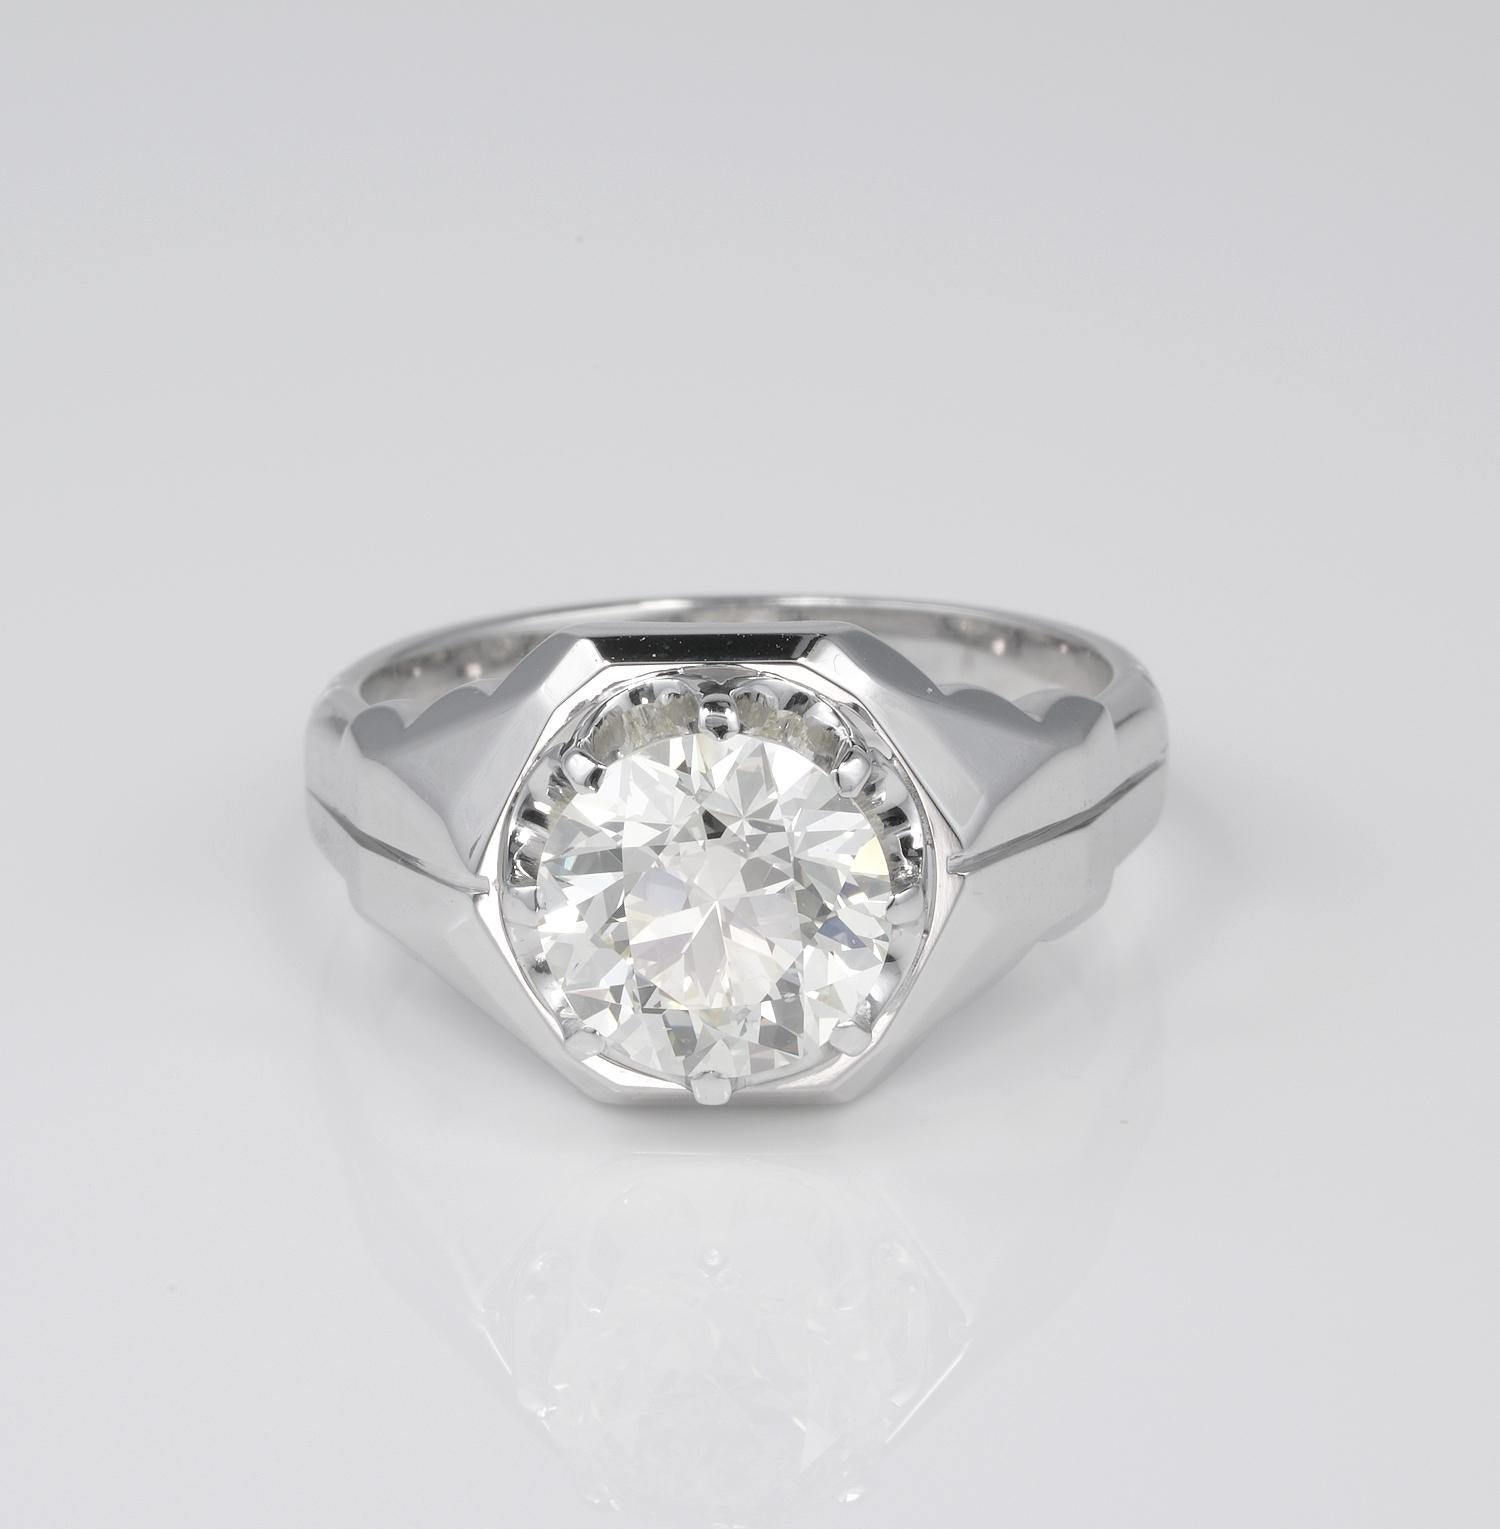 A stunning Retro style Gent  Diamond solitaire ring, 1940 ca
Italian origin
Strong character, sturdy style, hand constructed as unique in a timeless masculine design to fit and maximize the powerful beauty of the centre Diamond solitaire, 18 Kt